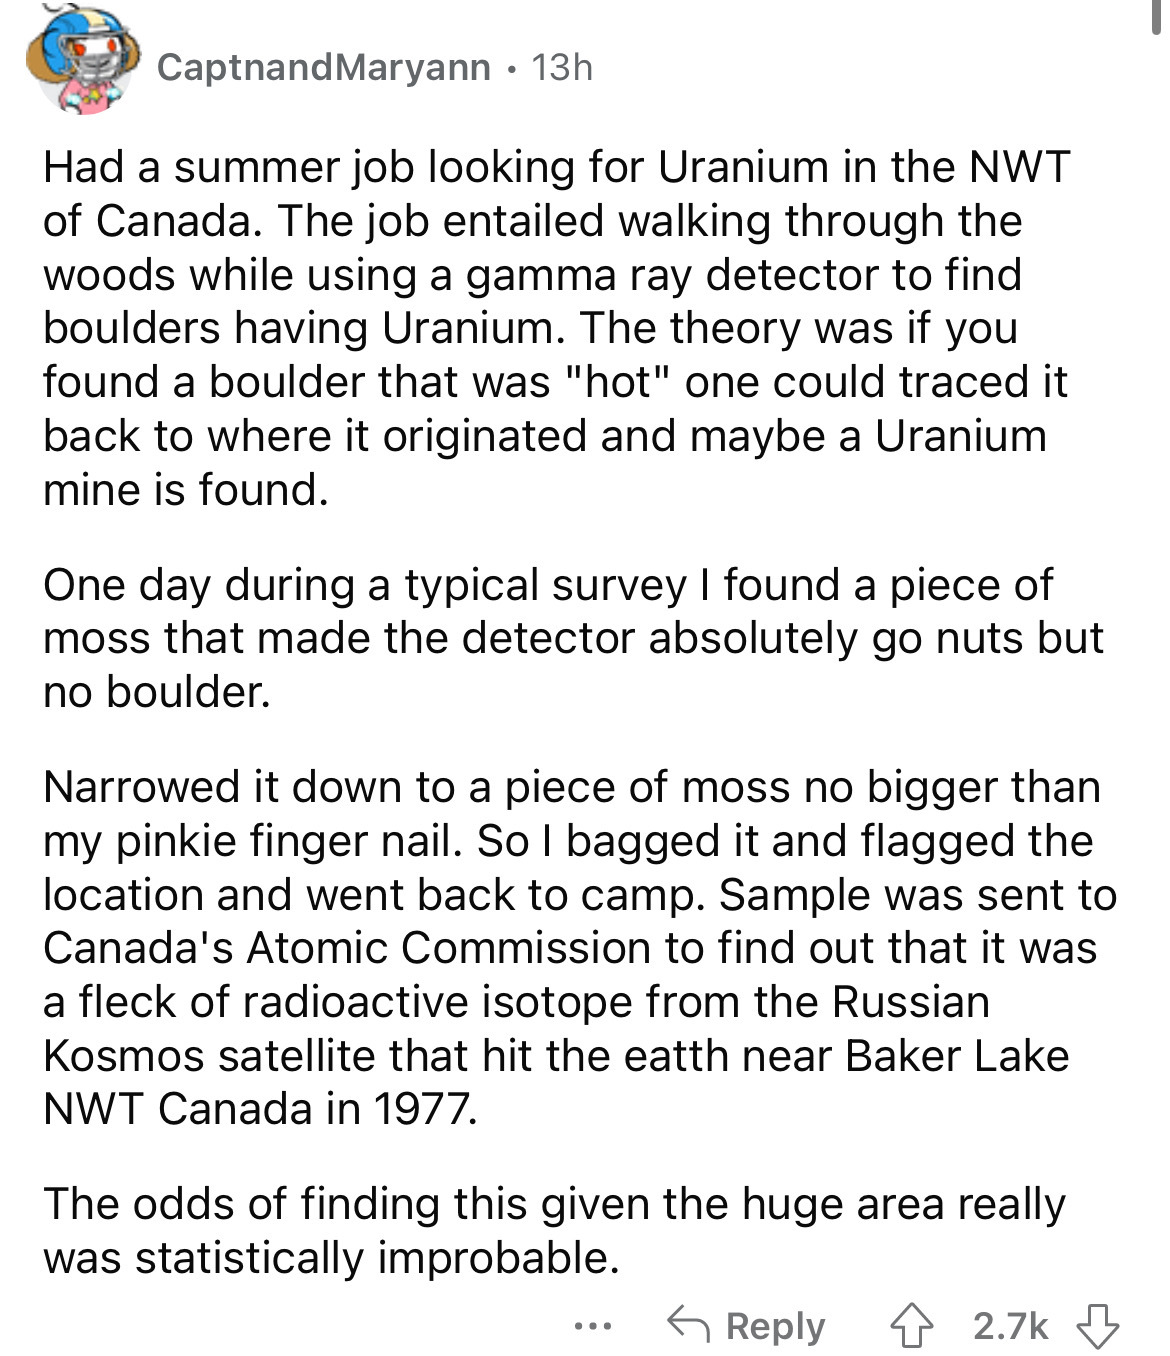 document - Captnand Maryann 13h Had a summer job looking for Uranium in the Nwt of Canada. The job entailed walking through the woods while using a gamma ray detector to find boulders having Uranium. The theory was if you found a boulder that was "hot" on